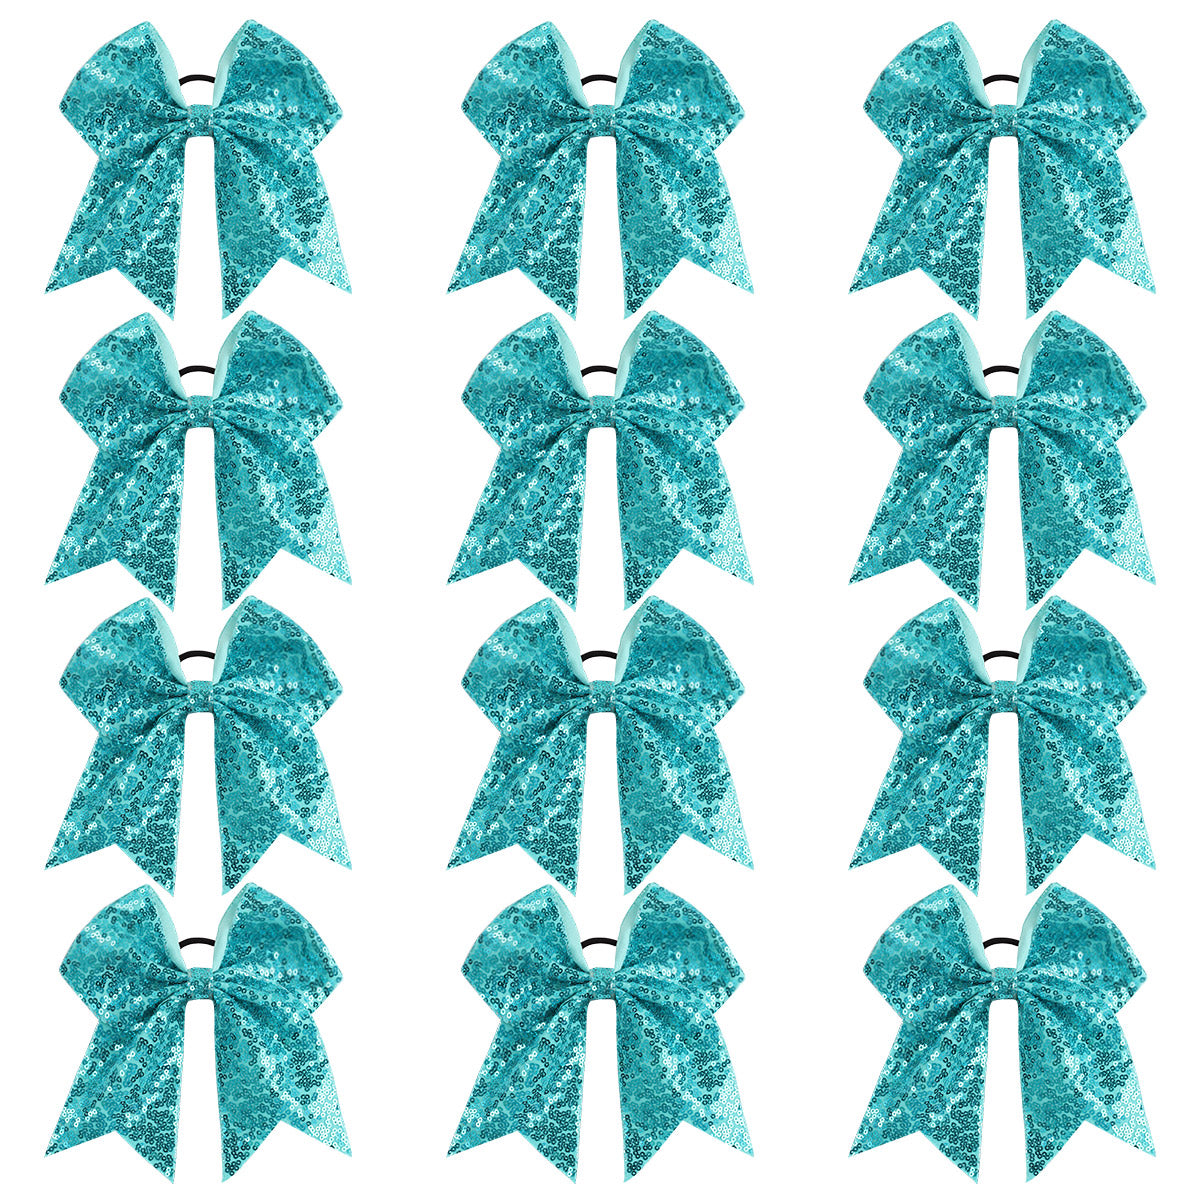 12PCS Sequin Cheer Bows for Teen Girls